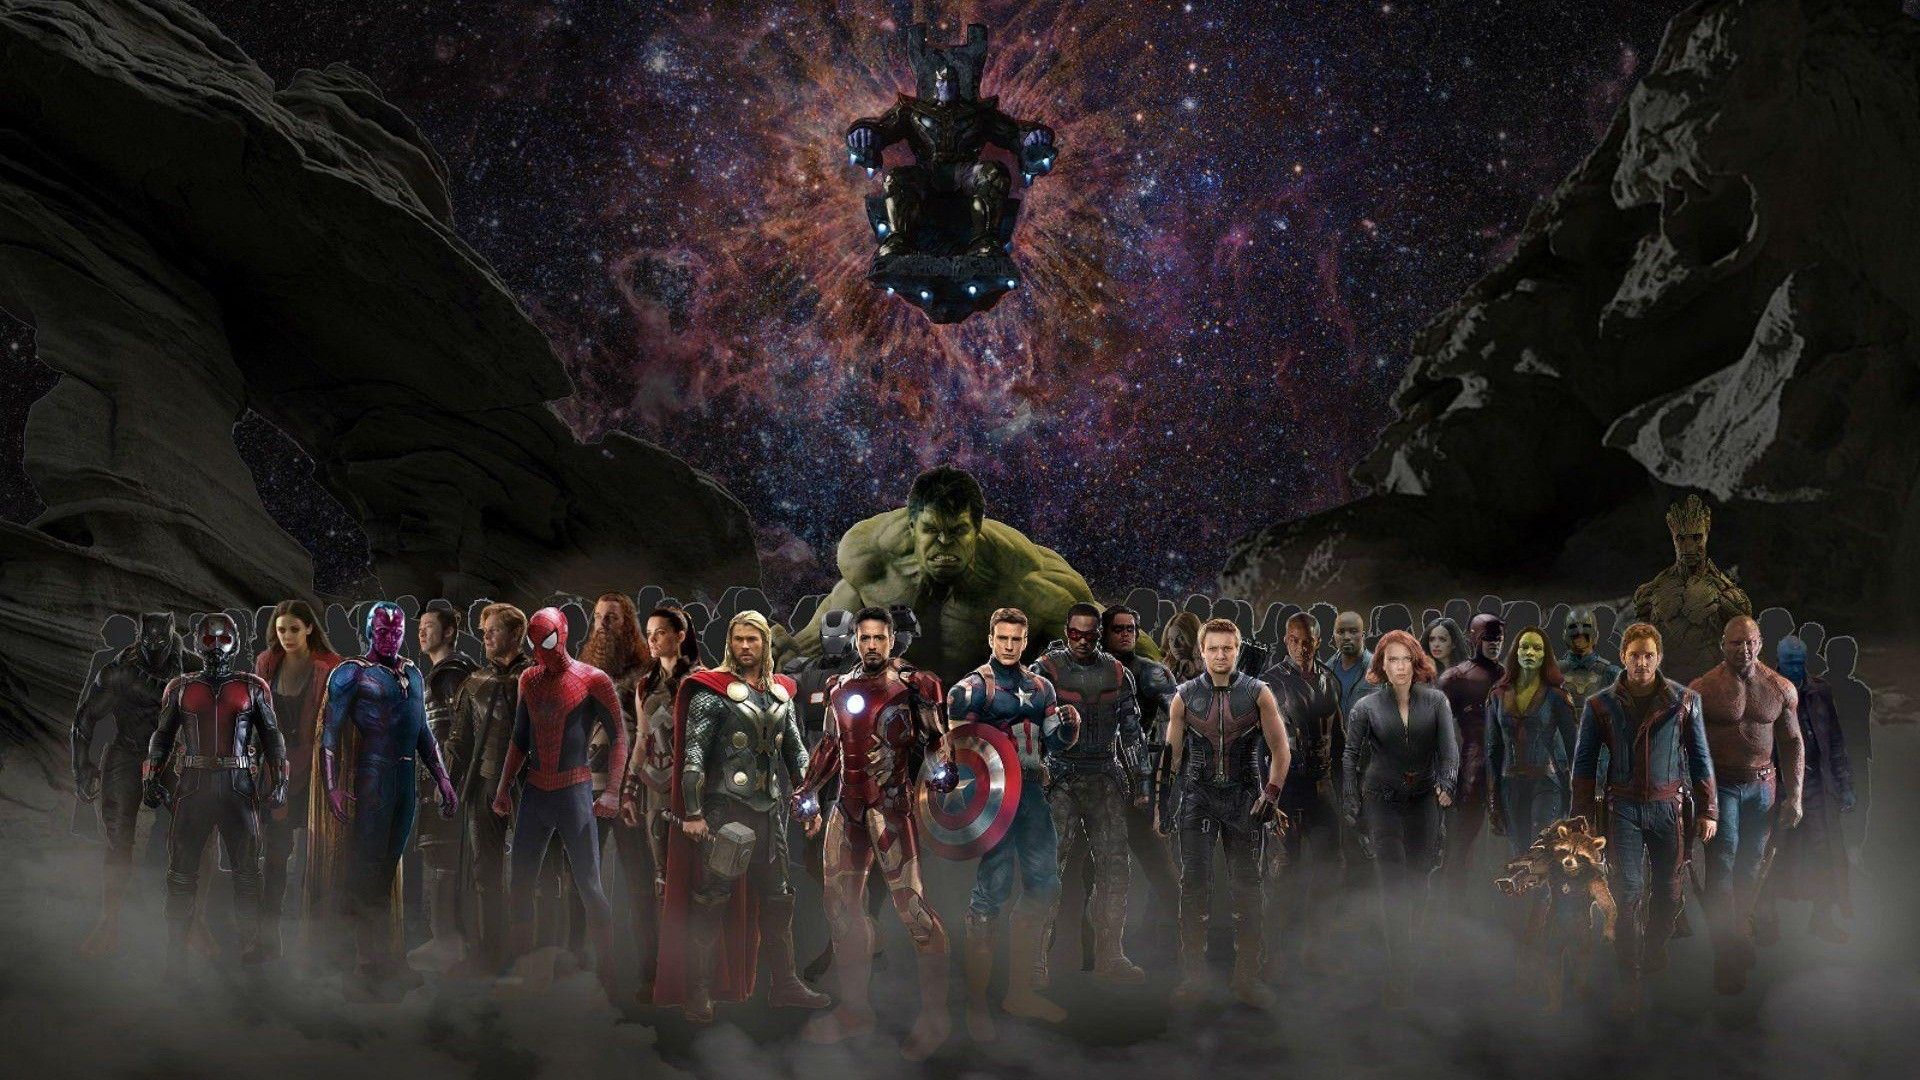 The Avengers: Endgame cast stands in front of a cosmic background - Avengers